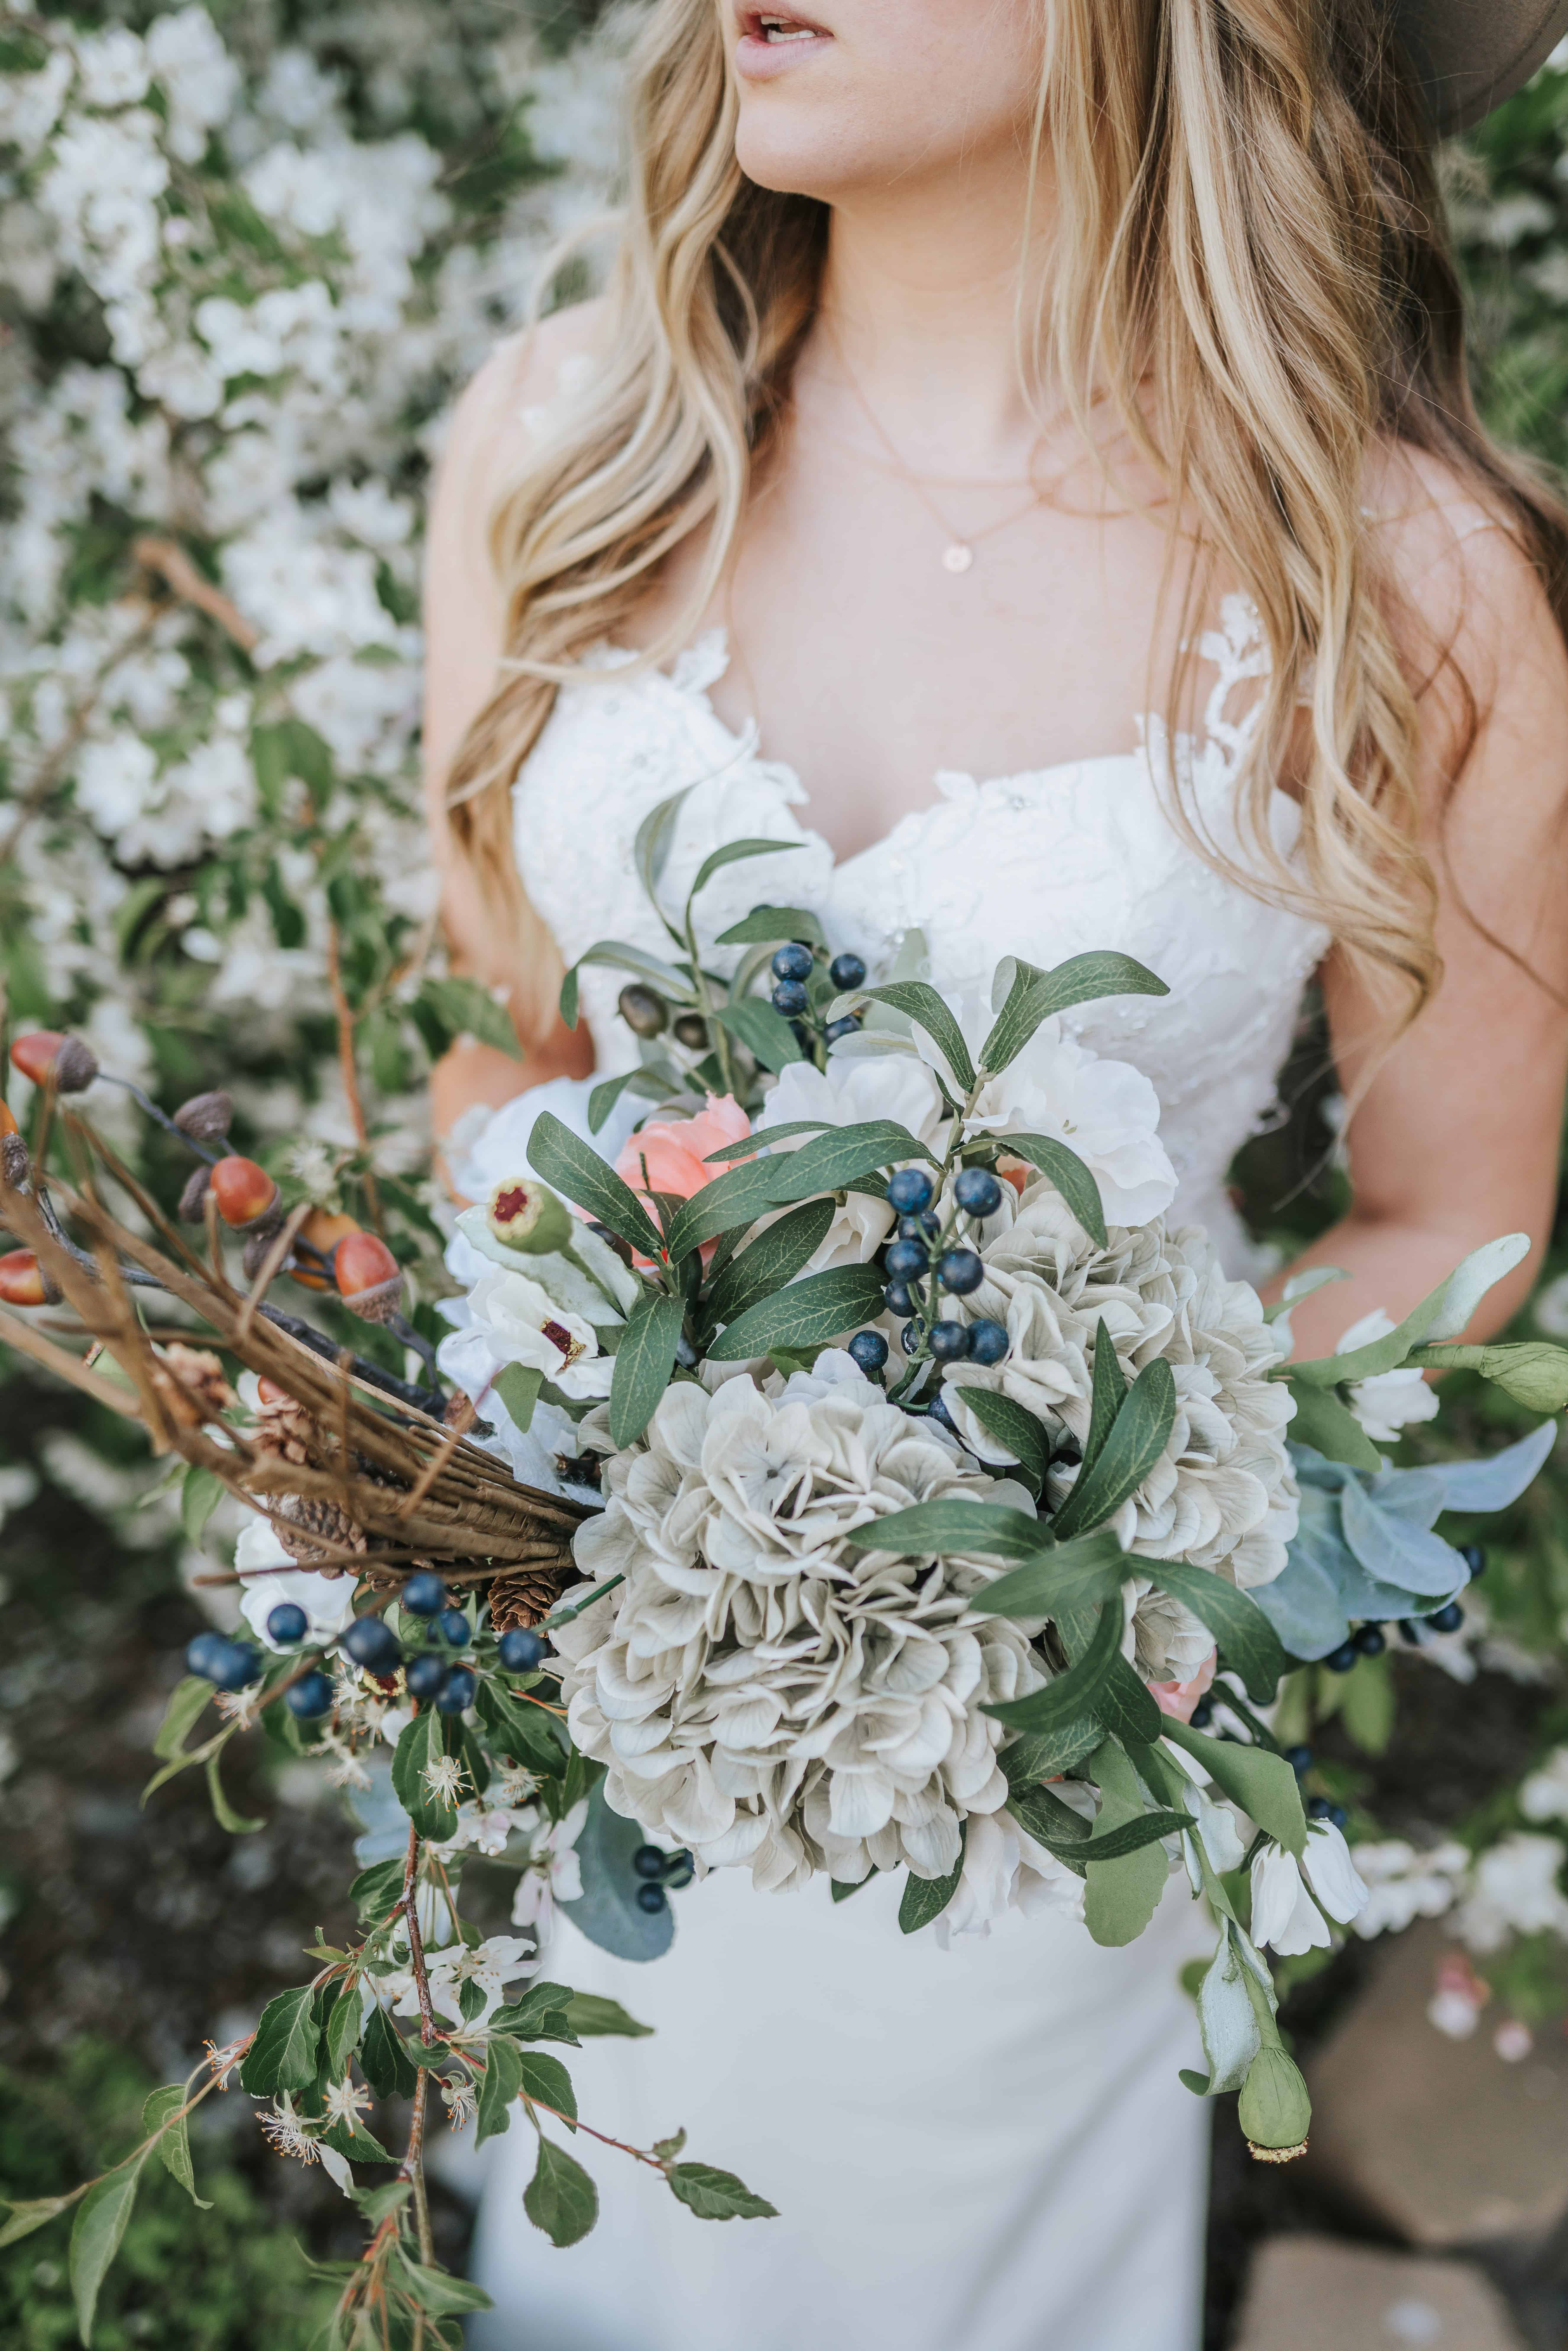 up close view of bride holding her floral arrnagement